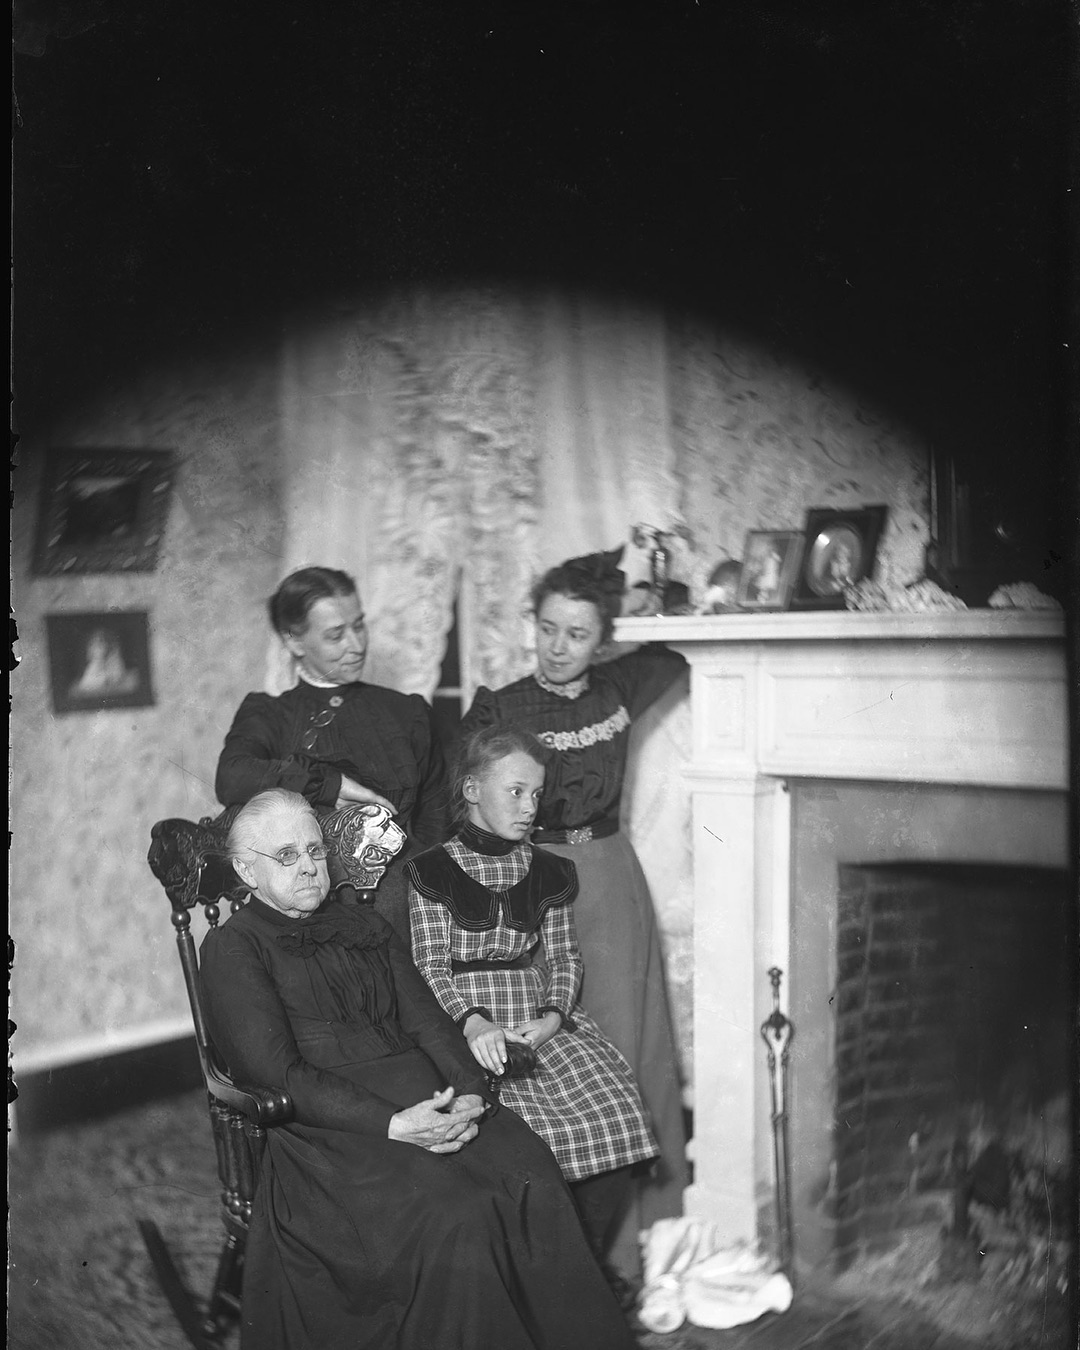 This is an interesting shot. Thereâs a 4.25 x 4.25 print of this one, but the negative is 5 x 7. With the masking, itâs like she shot this specifically to print on that paper. Like the first photo in this series, this shows four generations of the Garner family women: Harriet Murray Garner, the matriarch; Eleanora Garner Colton, Harrietâs daughter and the photographer of all these shots; Eleanoraâs daughter Loui Colton Johnston, and Louiâs daughter Helen Johnston. 
#dryplate #dryplatephotography #dryplatenegative #film #filmphotography #foundphoto #foundphotos #garnerfamilyarchive